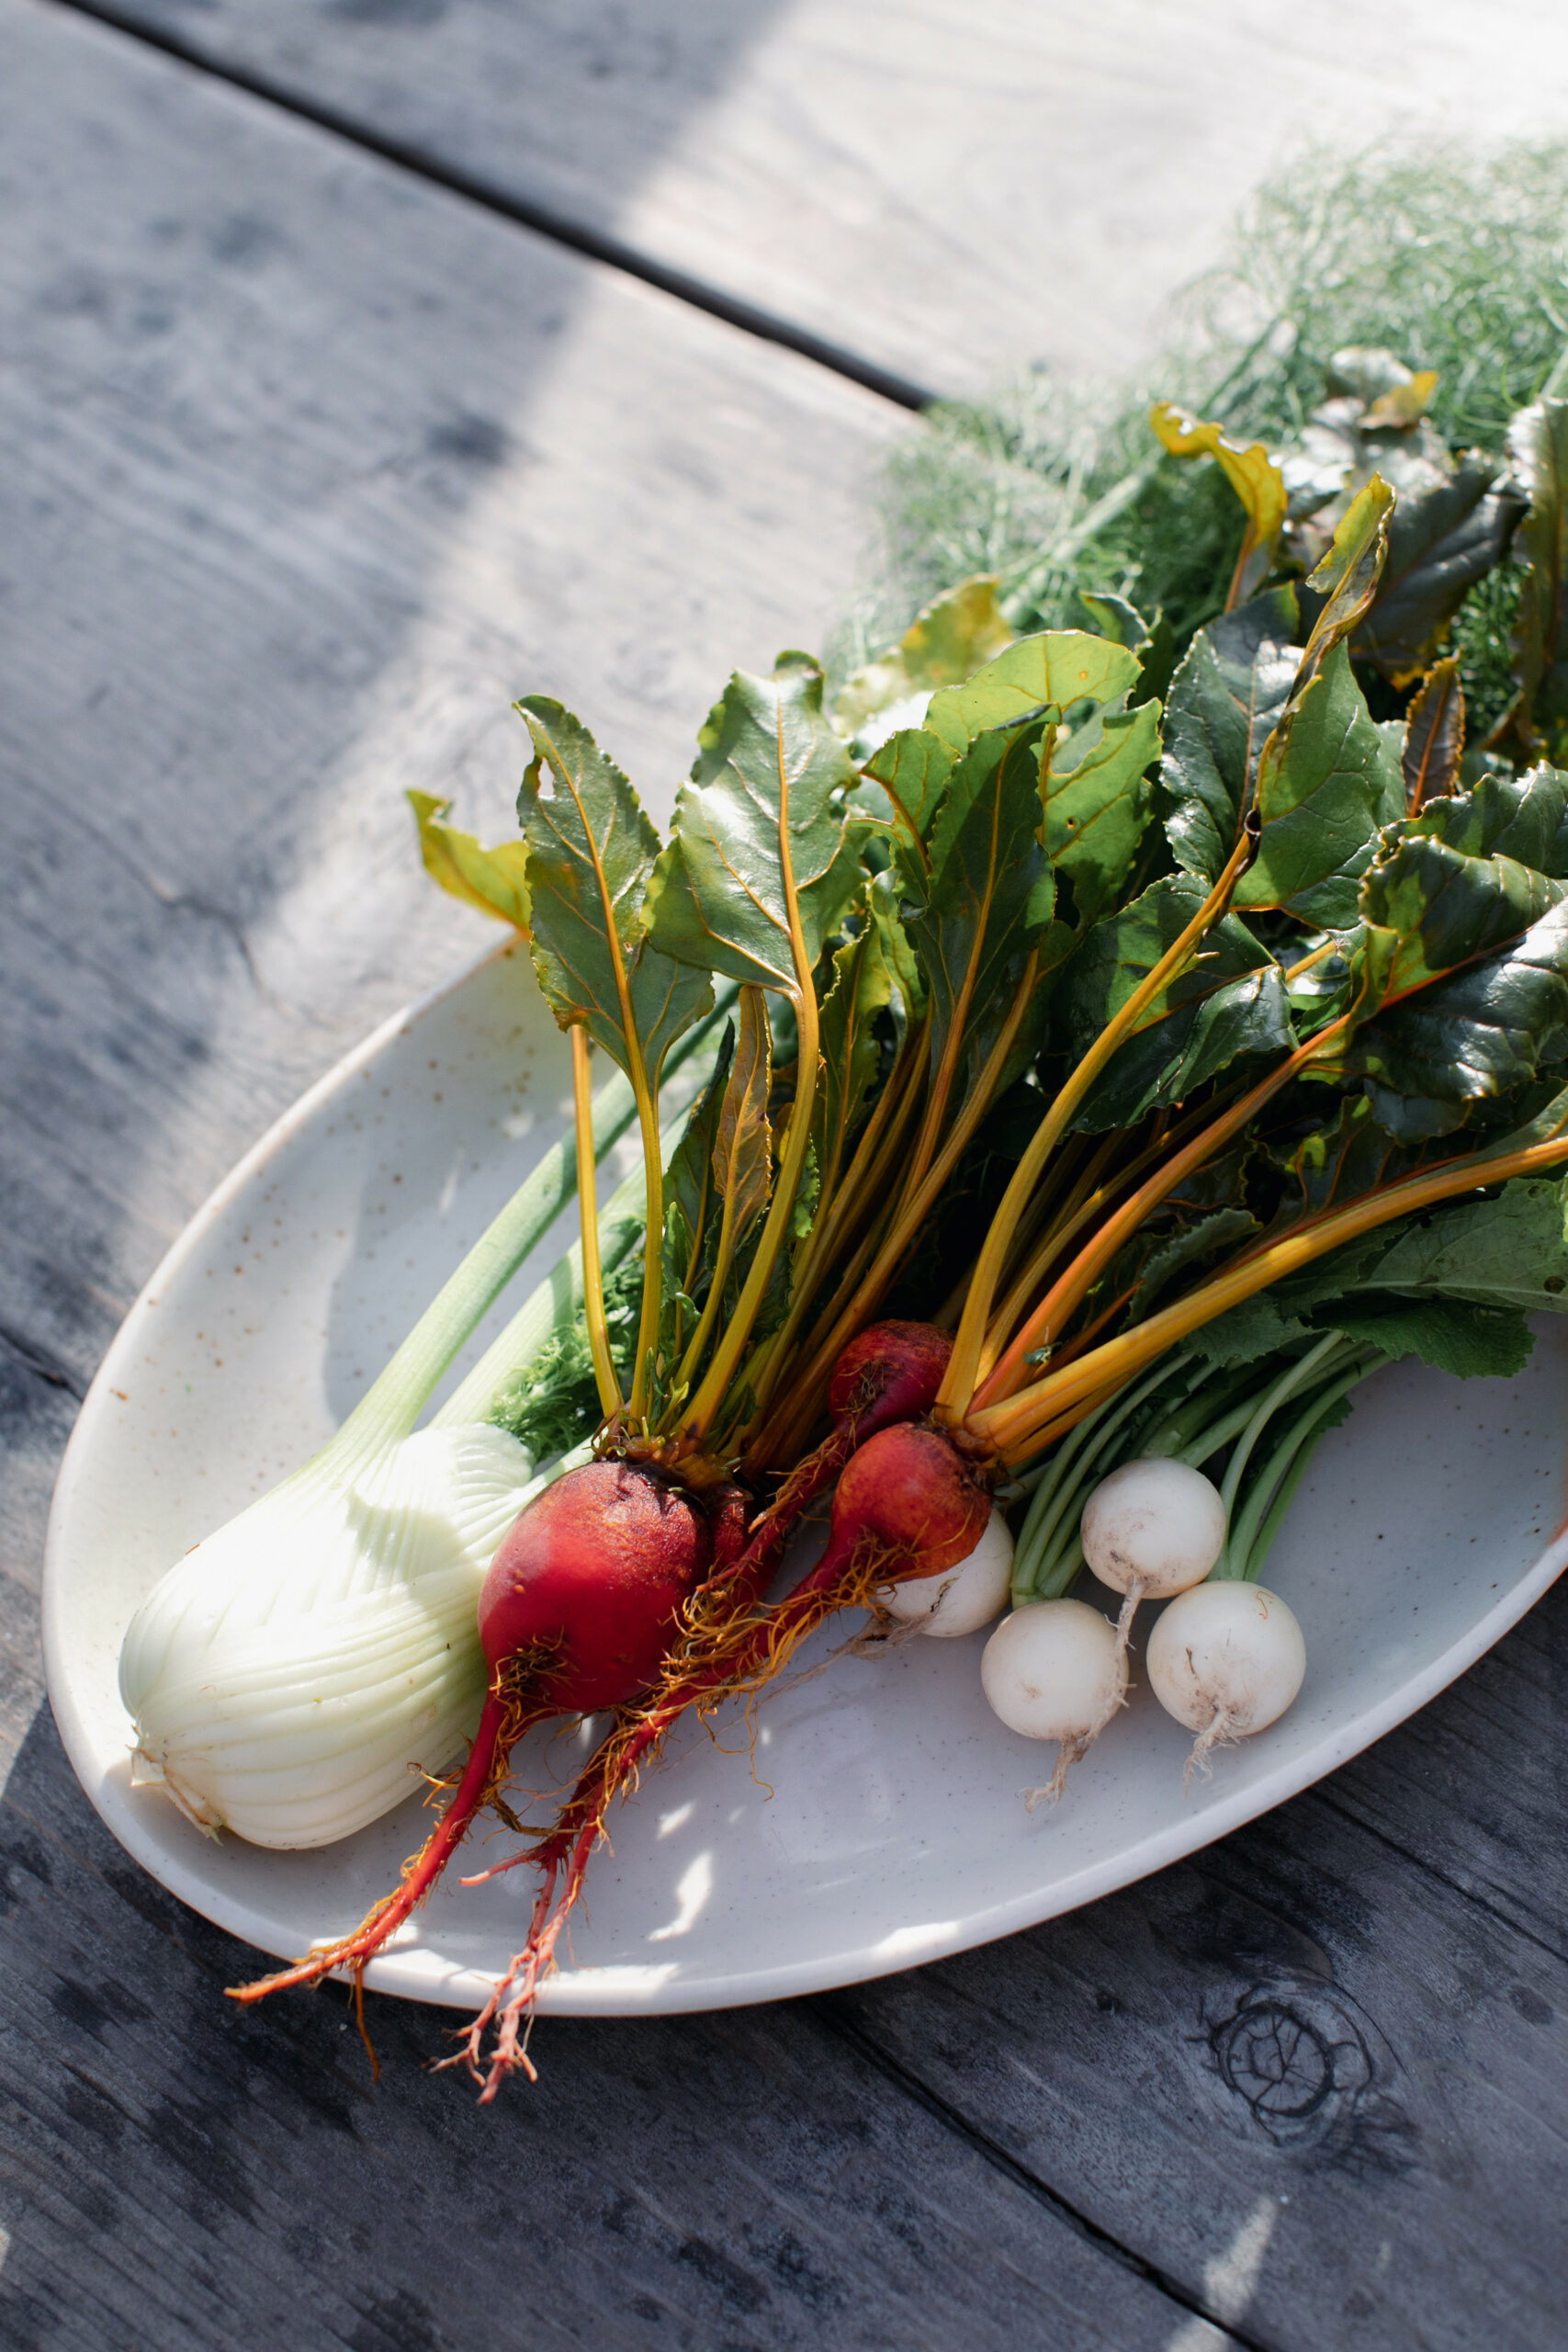 An abundance of late winter and early spring veggies: beets, fennel, and turnips. (Eileen Roche/for Sonoma Magazine)